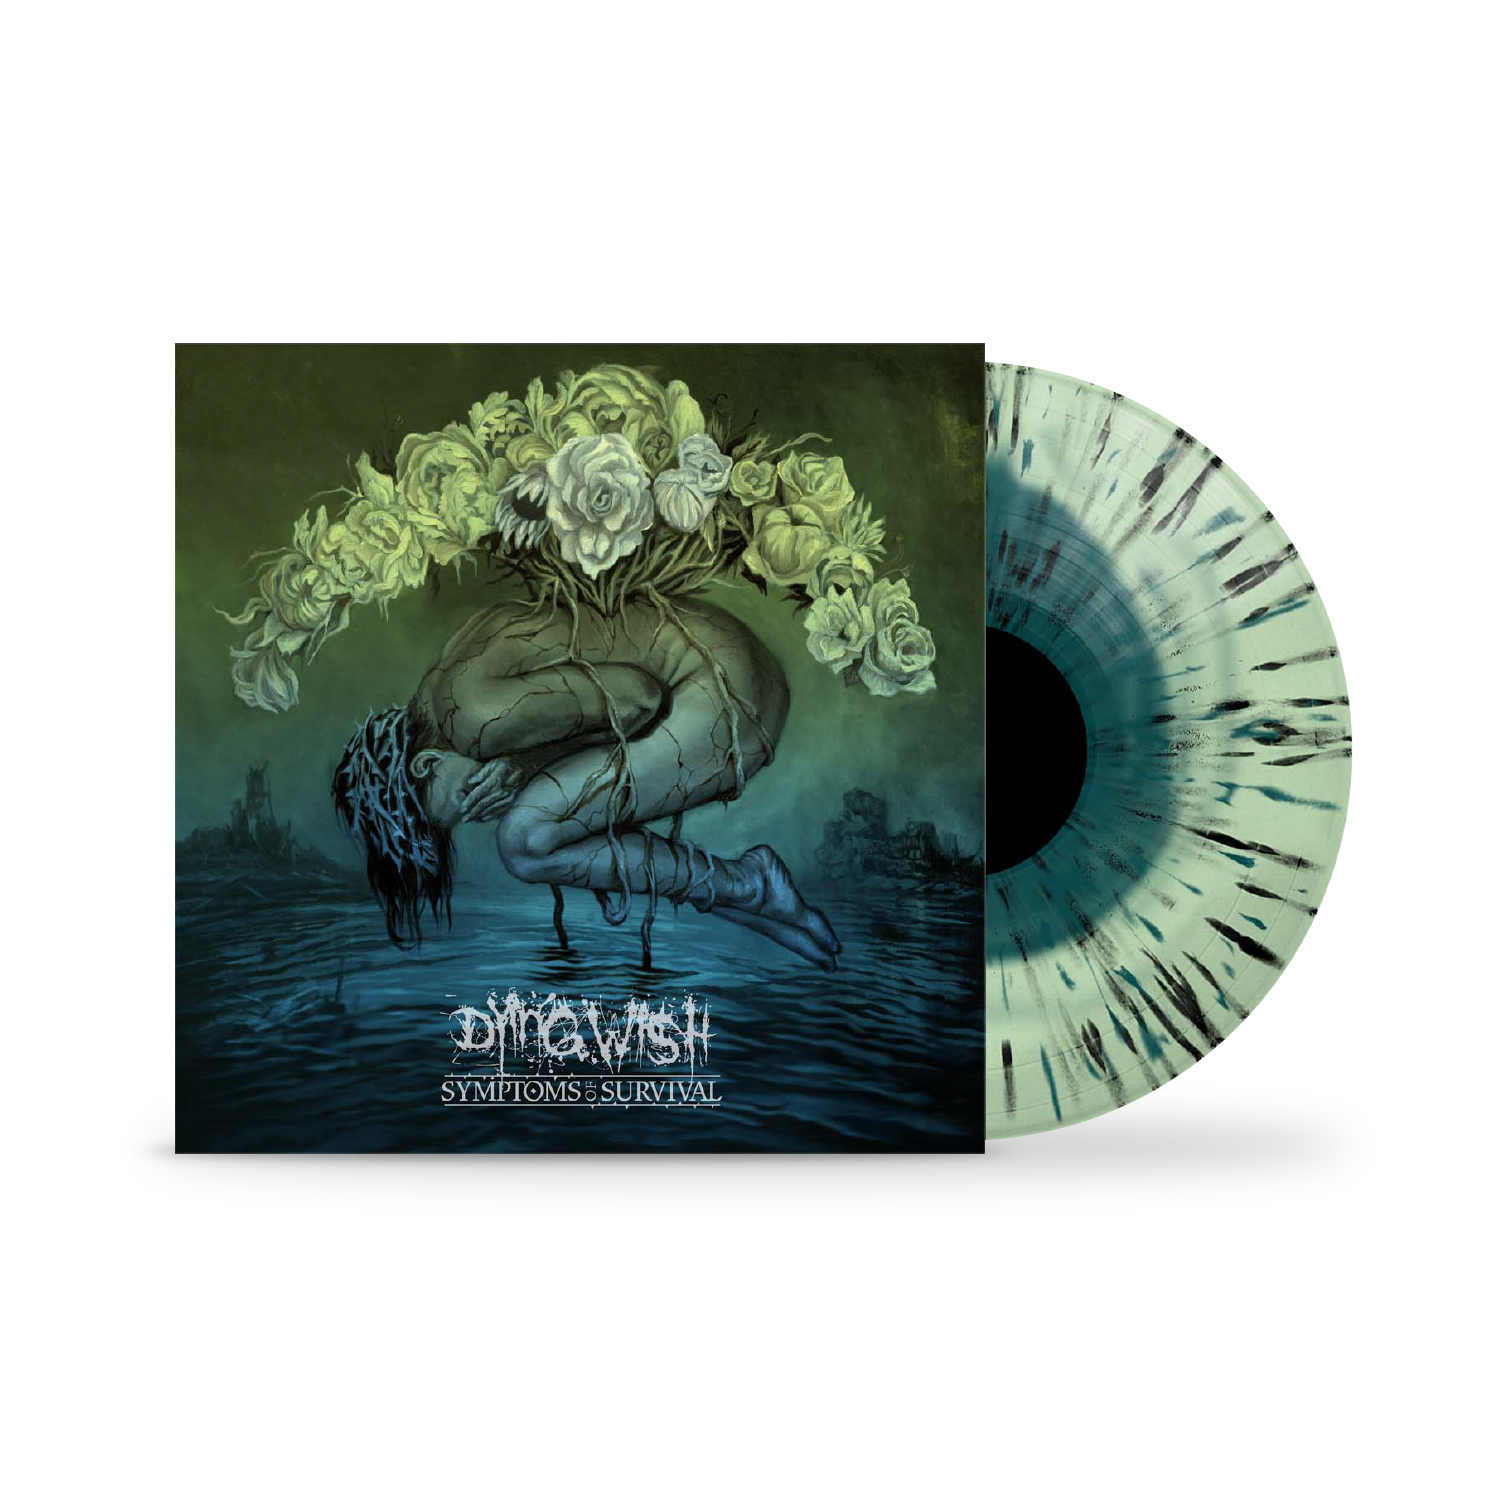 Symptoms of Survival 12" Vinyl - Blue in Green with Black Splatter (Limited to 1000 Copies)